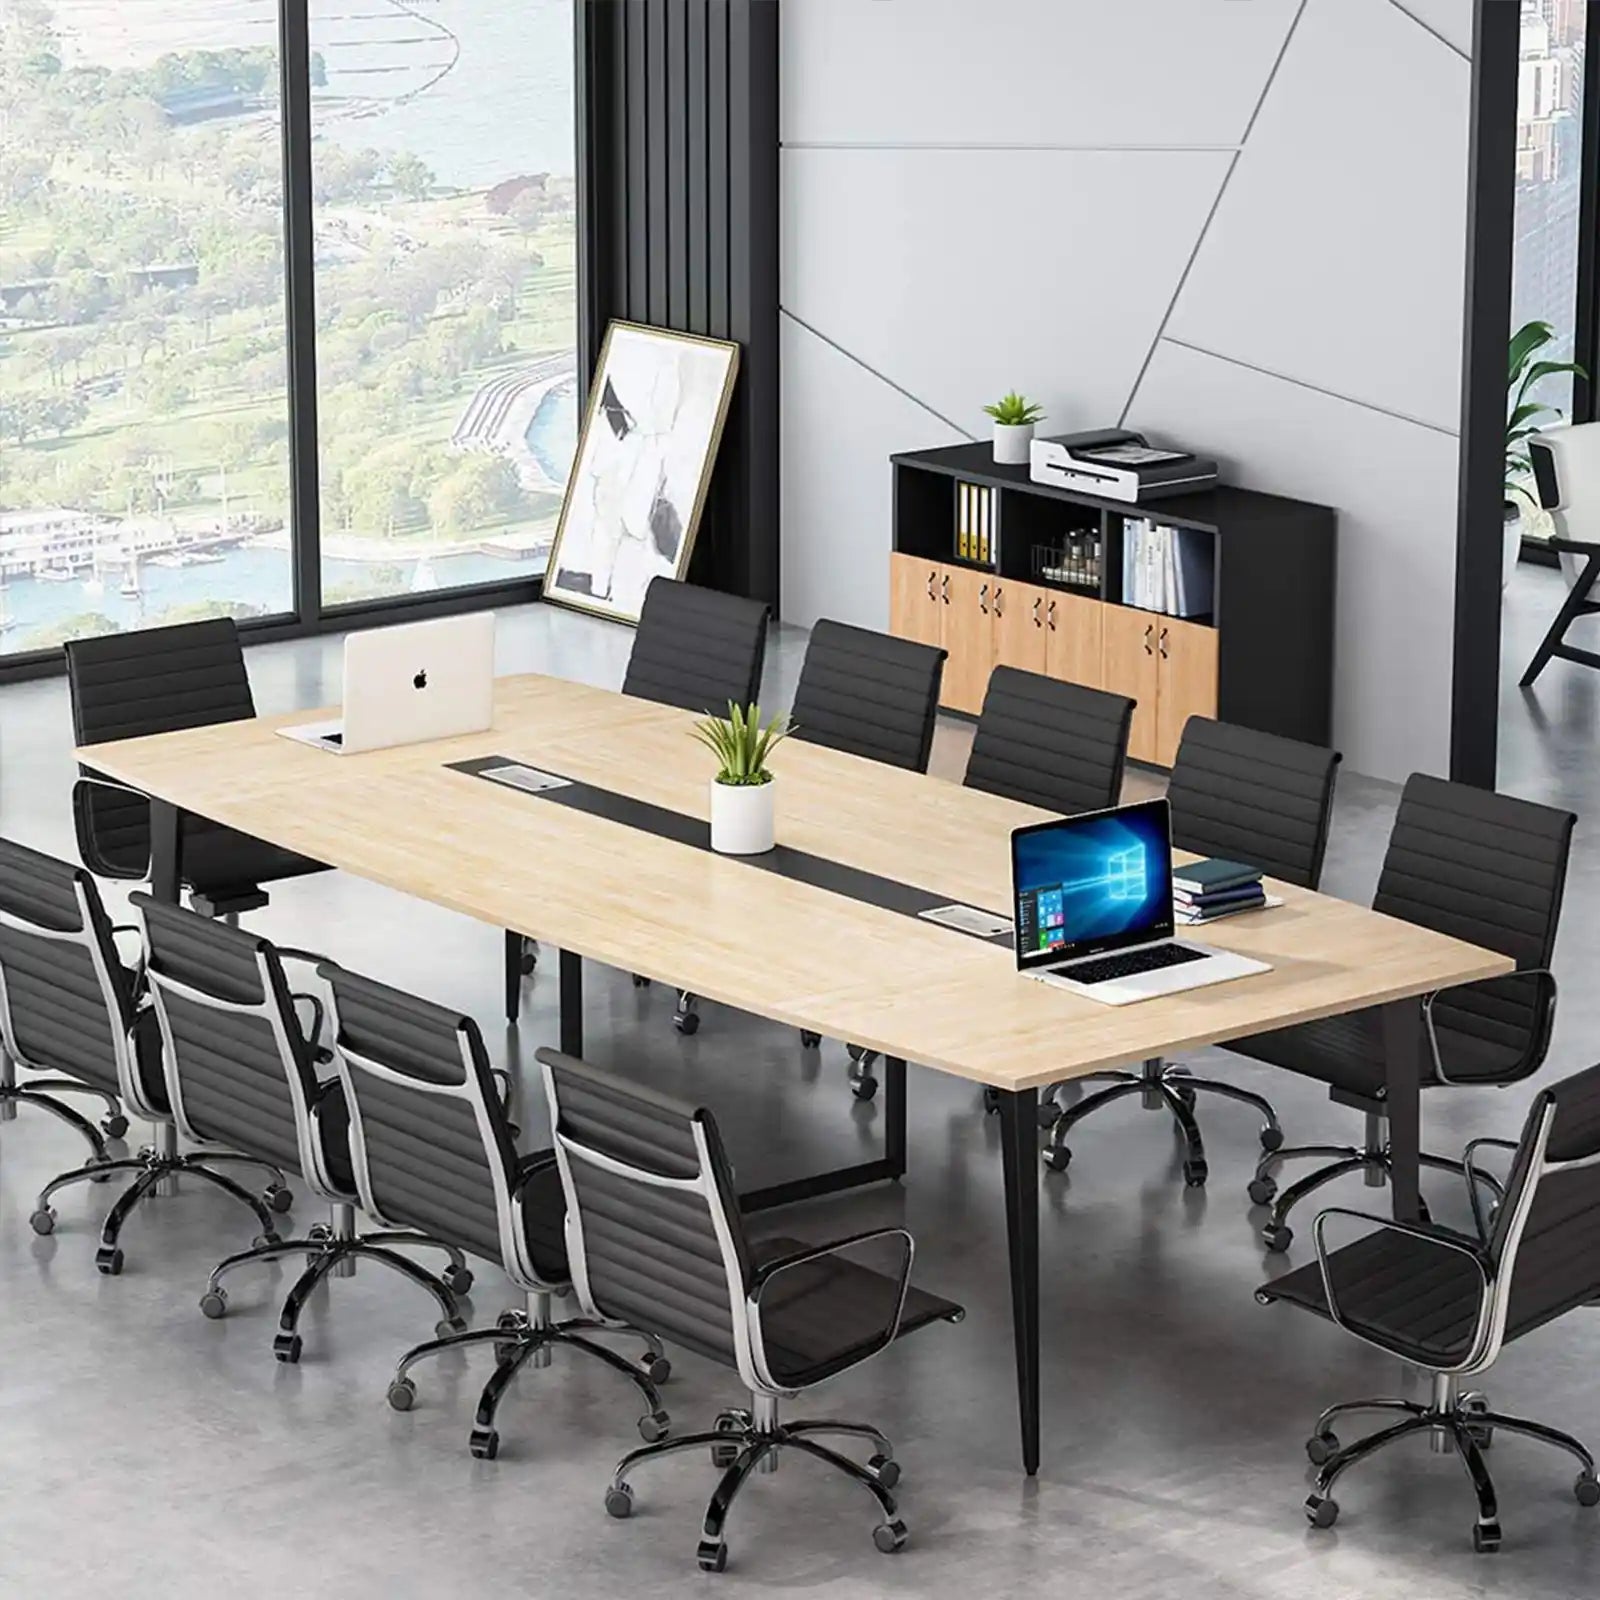 Shaped Meeting Table with Rectangle Seminar Table